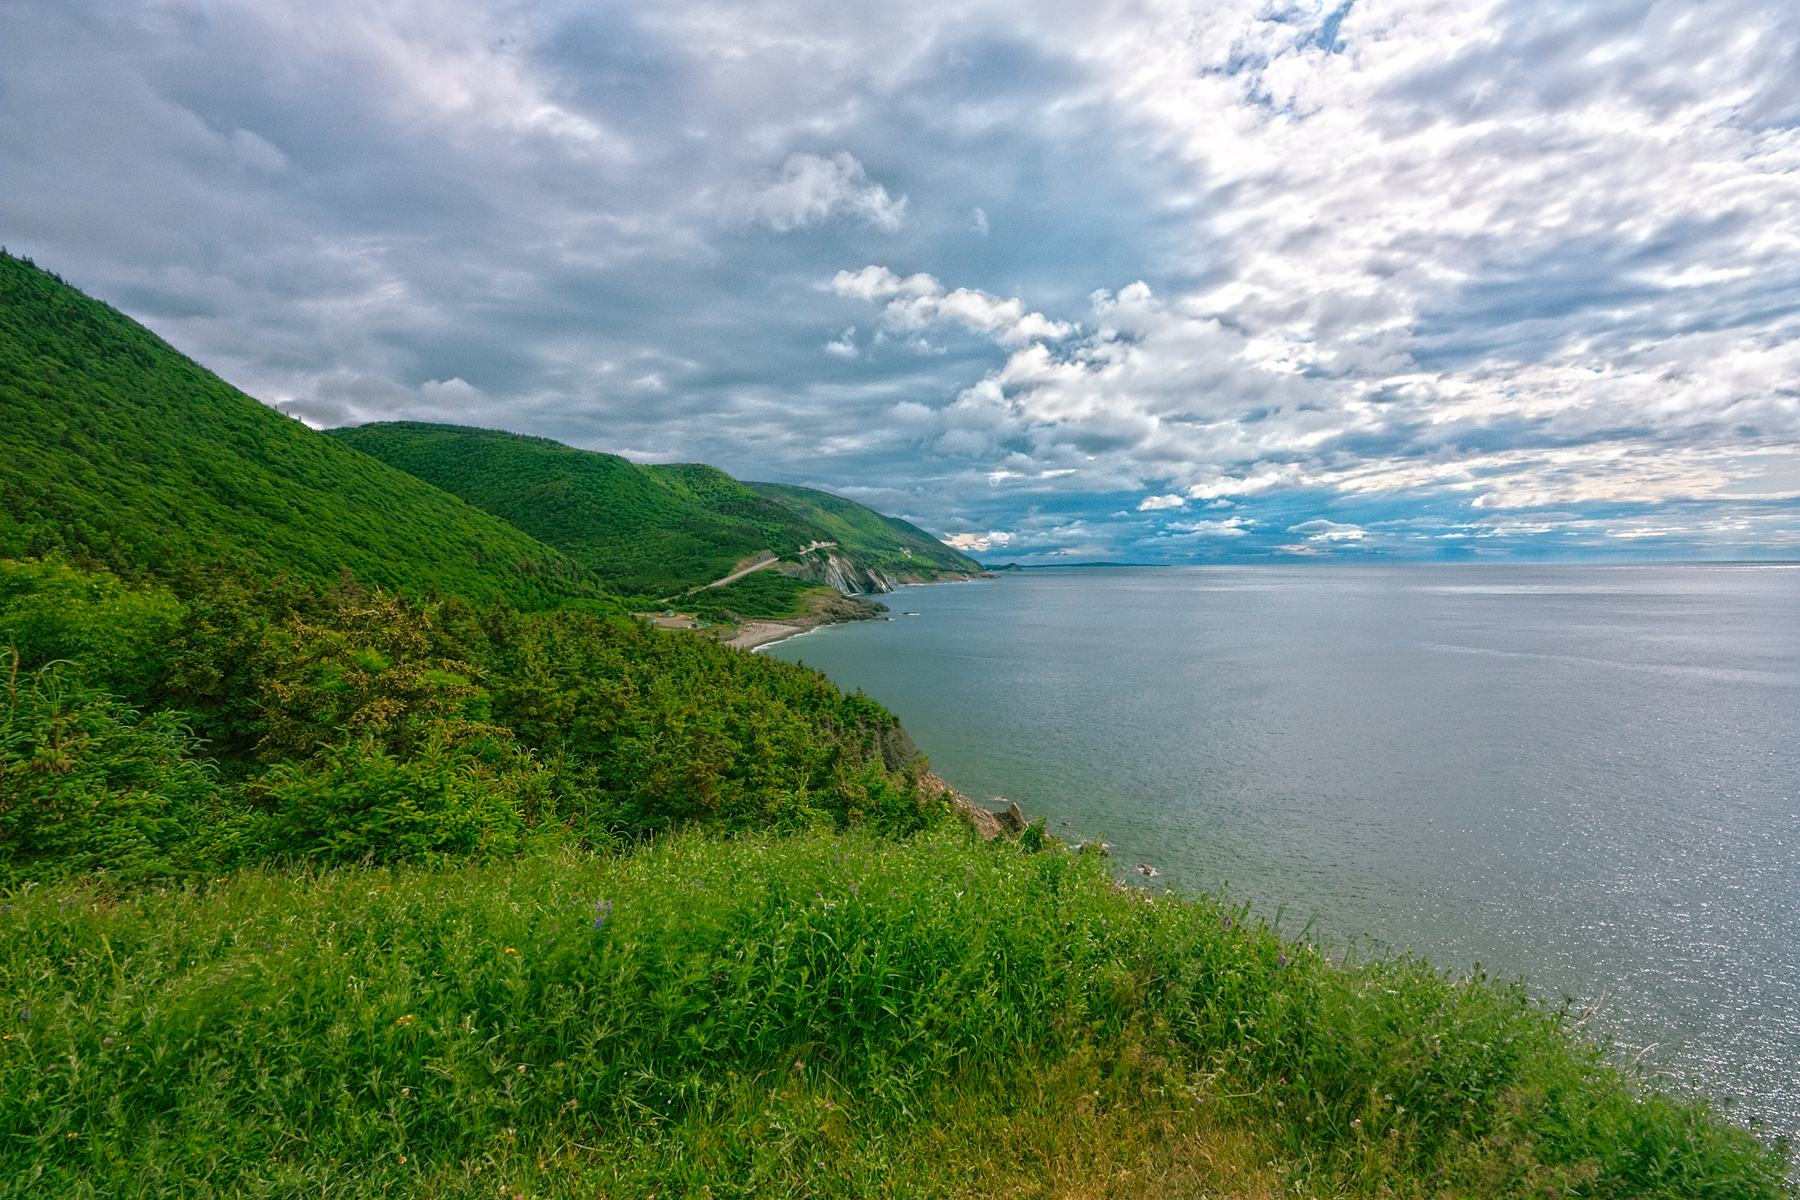 Cabot trail scenery - hdr photo